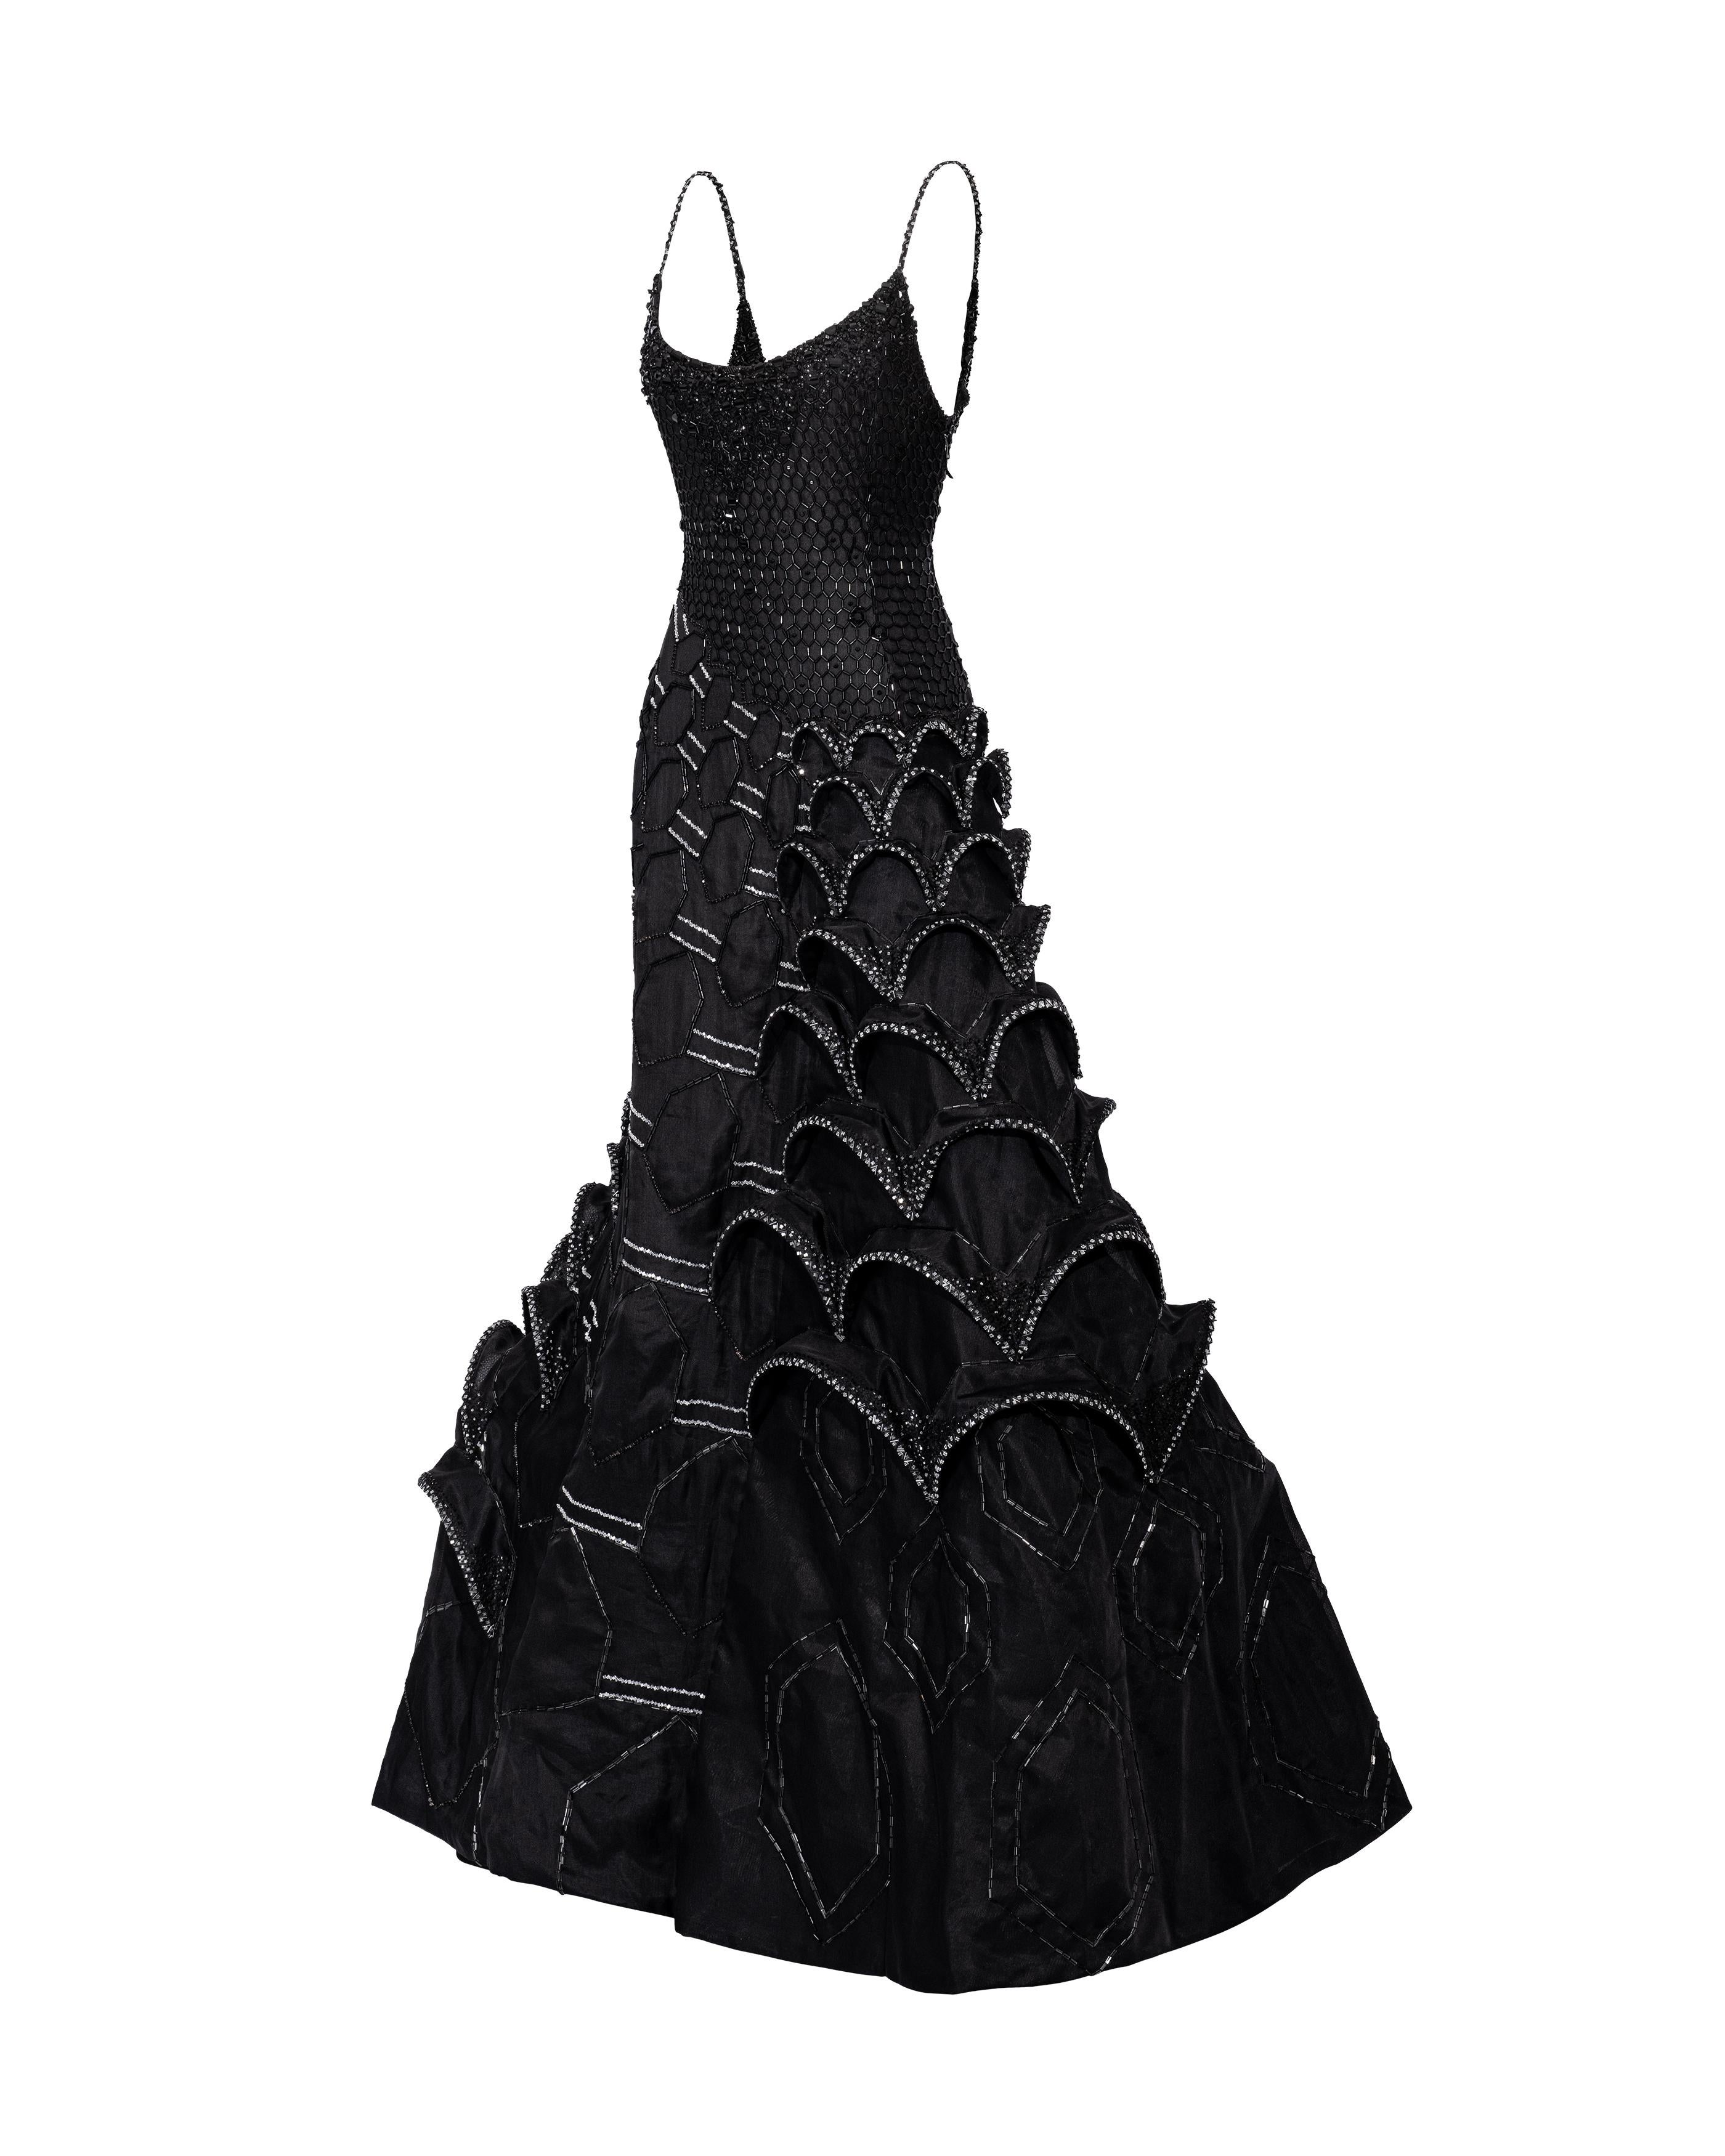 S/S 1999 Atelier Versace Haute Couture Black Embellished Sculptural Gown In Good Condition In North Hollywood, CA